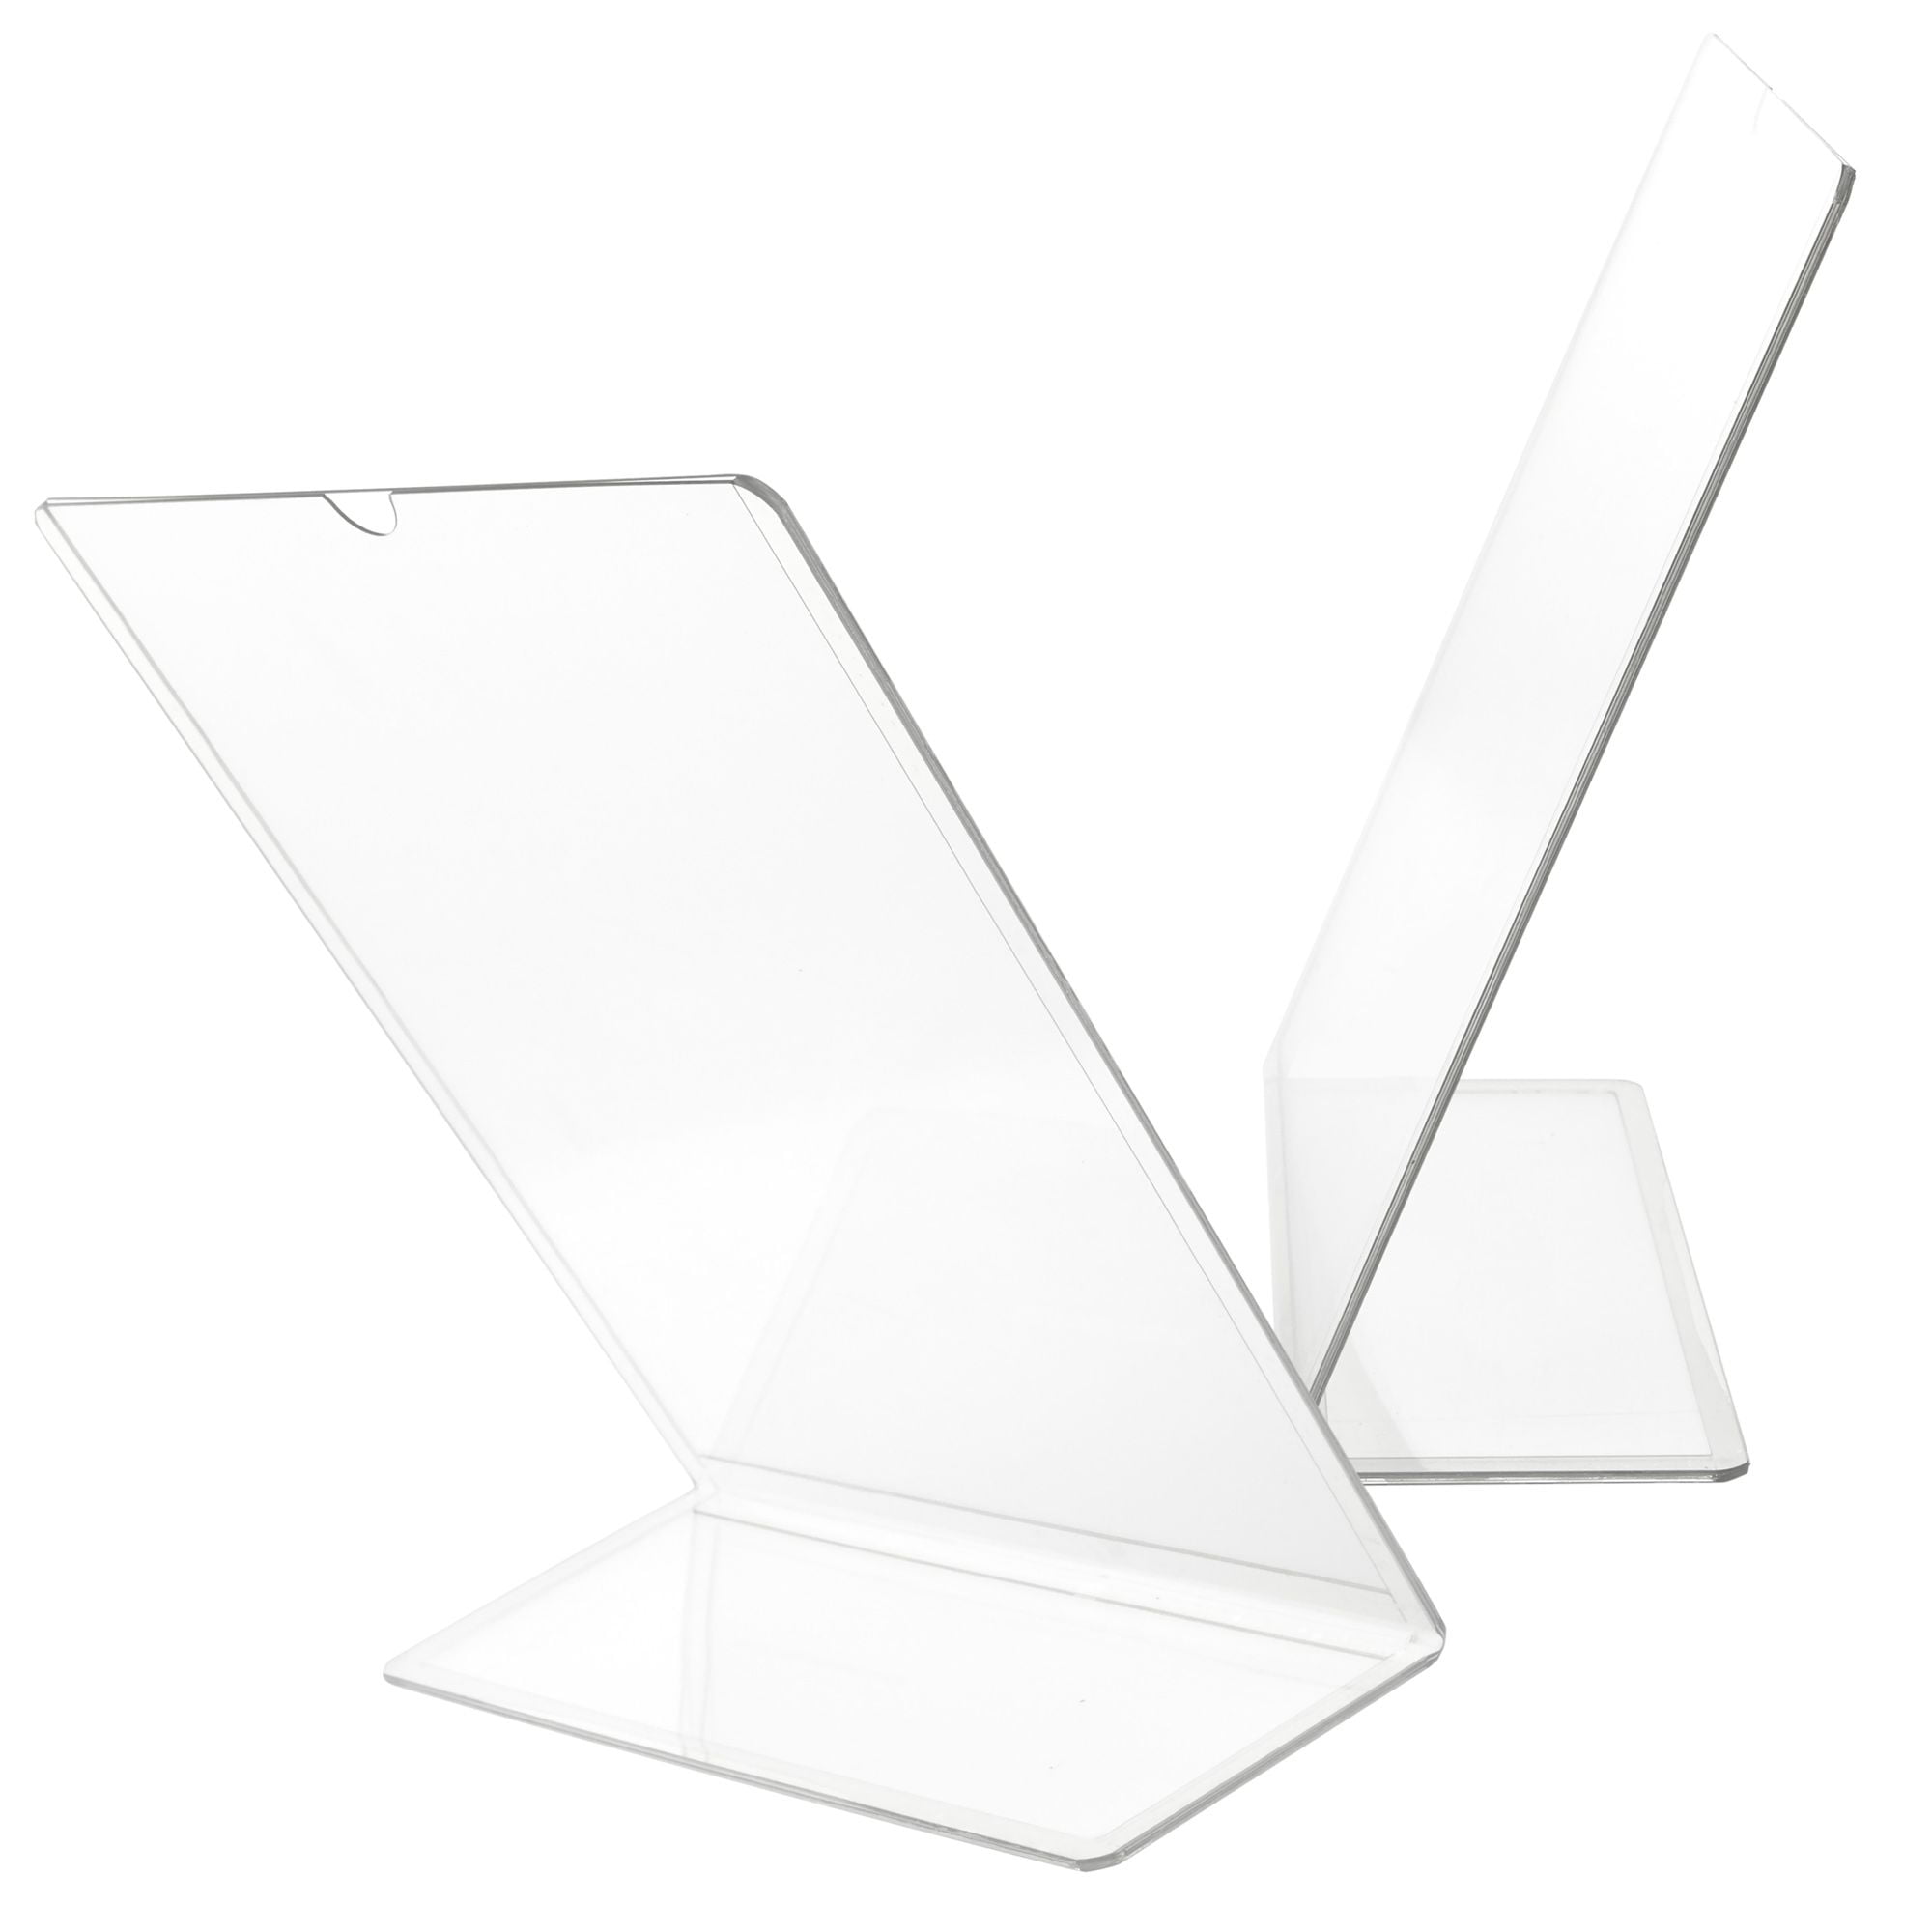 Acrylic Blanks : Foam Stands for A5, A4 & A3 Sheets - SA